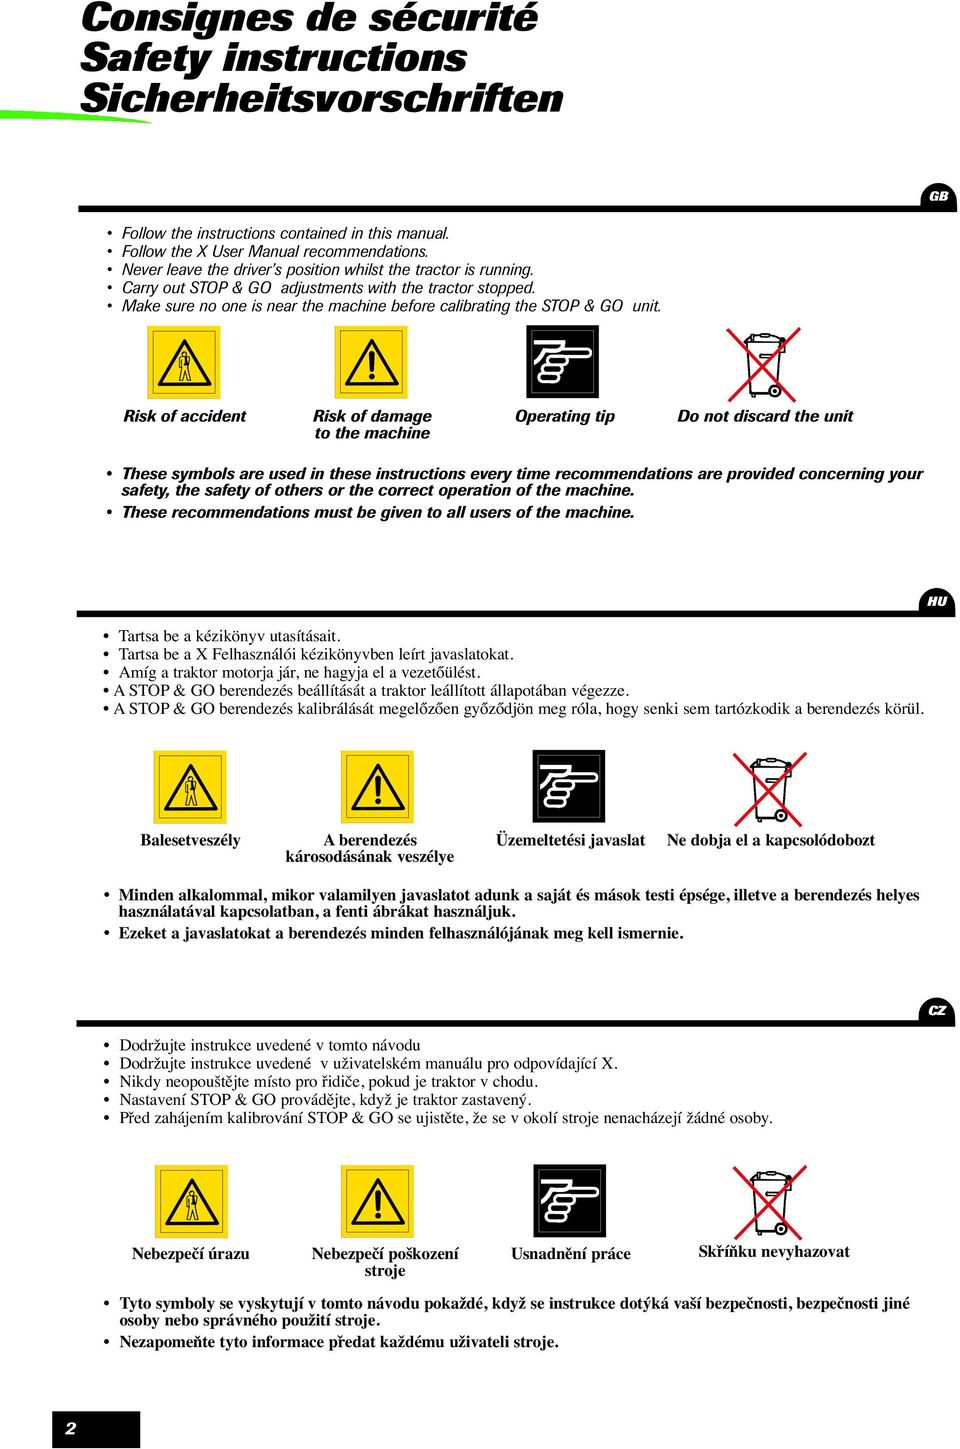 Risk of accident Risk of damage to the machine Operating tip Do not discard the unit These symbols are used in these instructions every time recommendations are provided concerning your safety, the